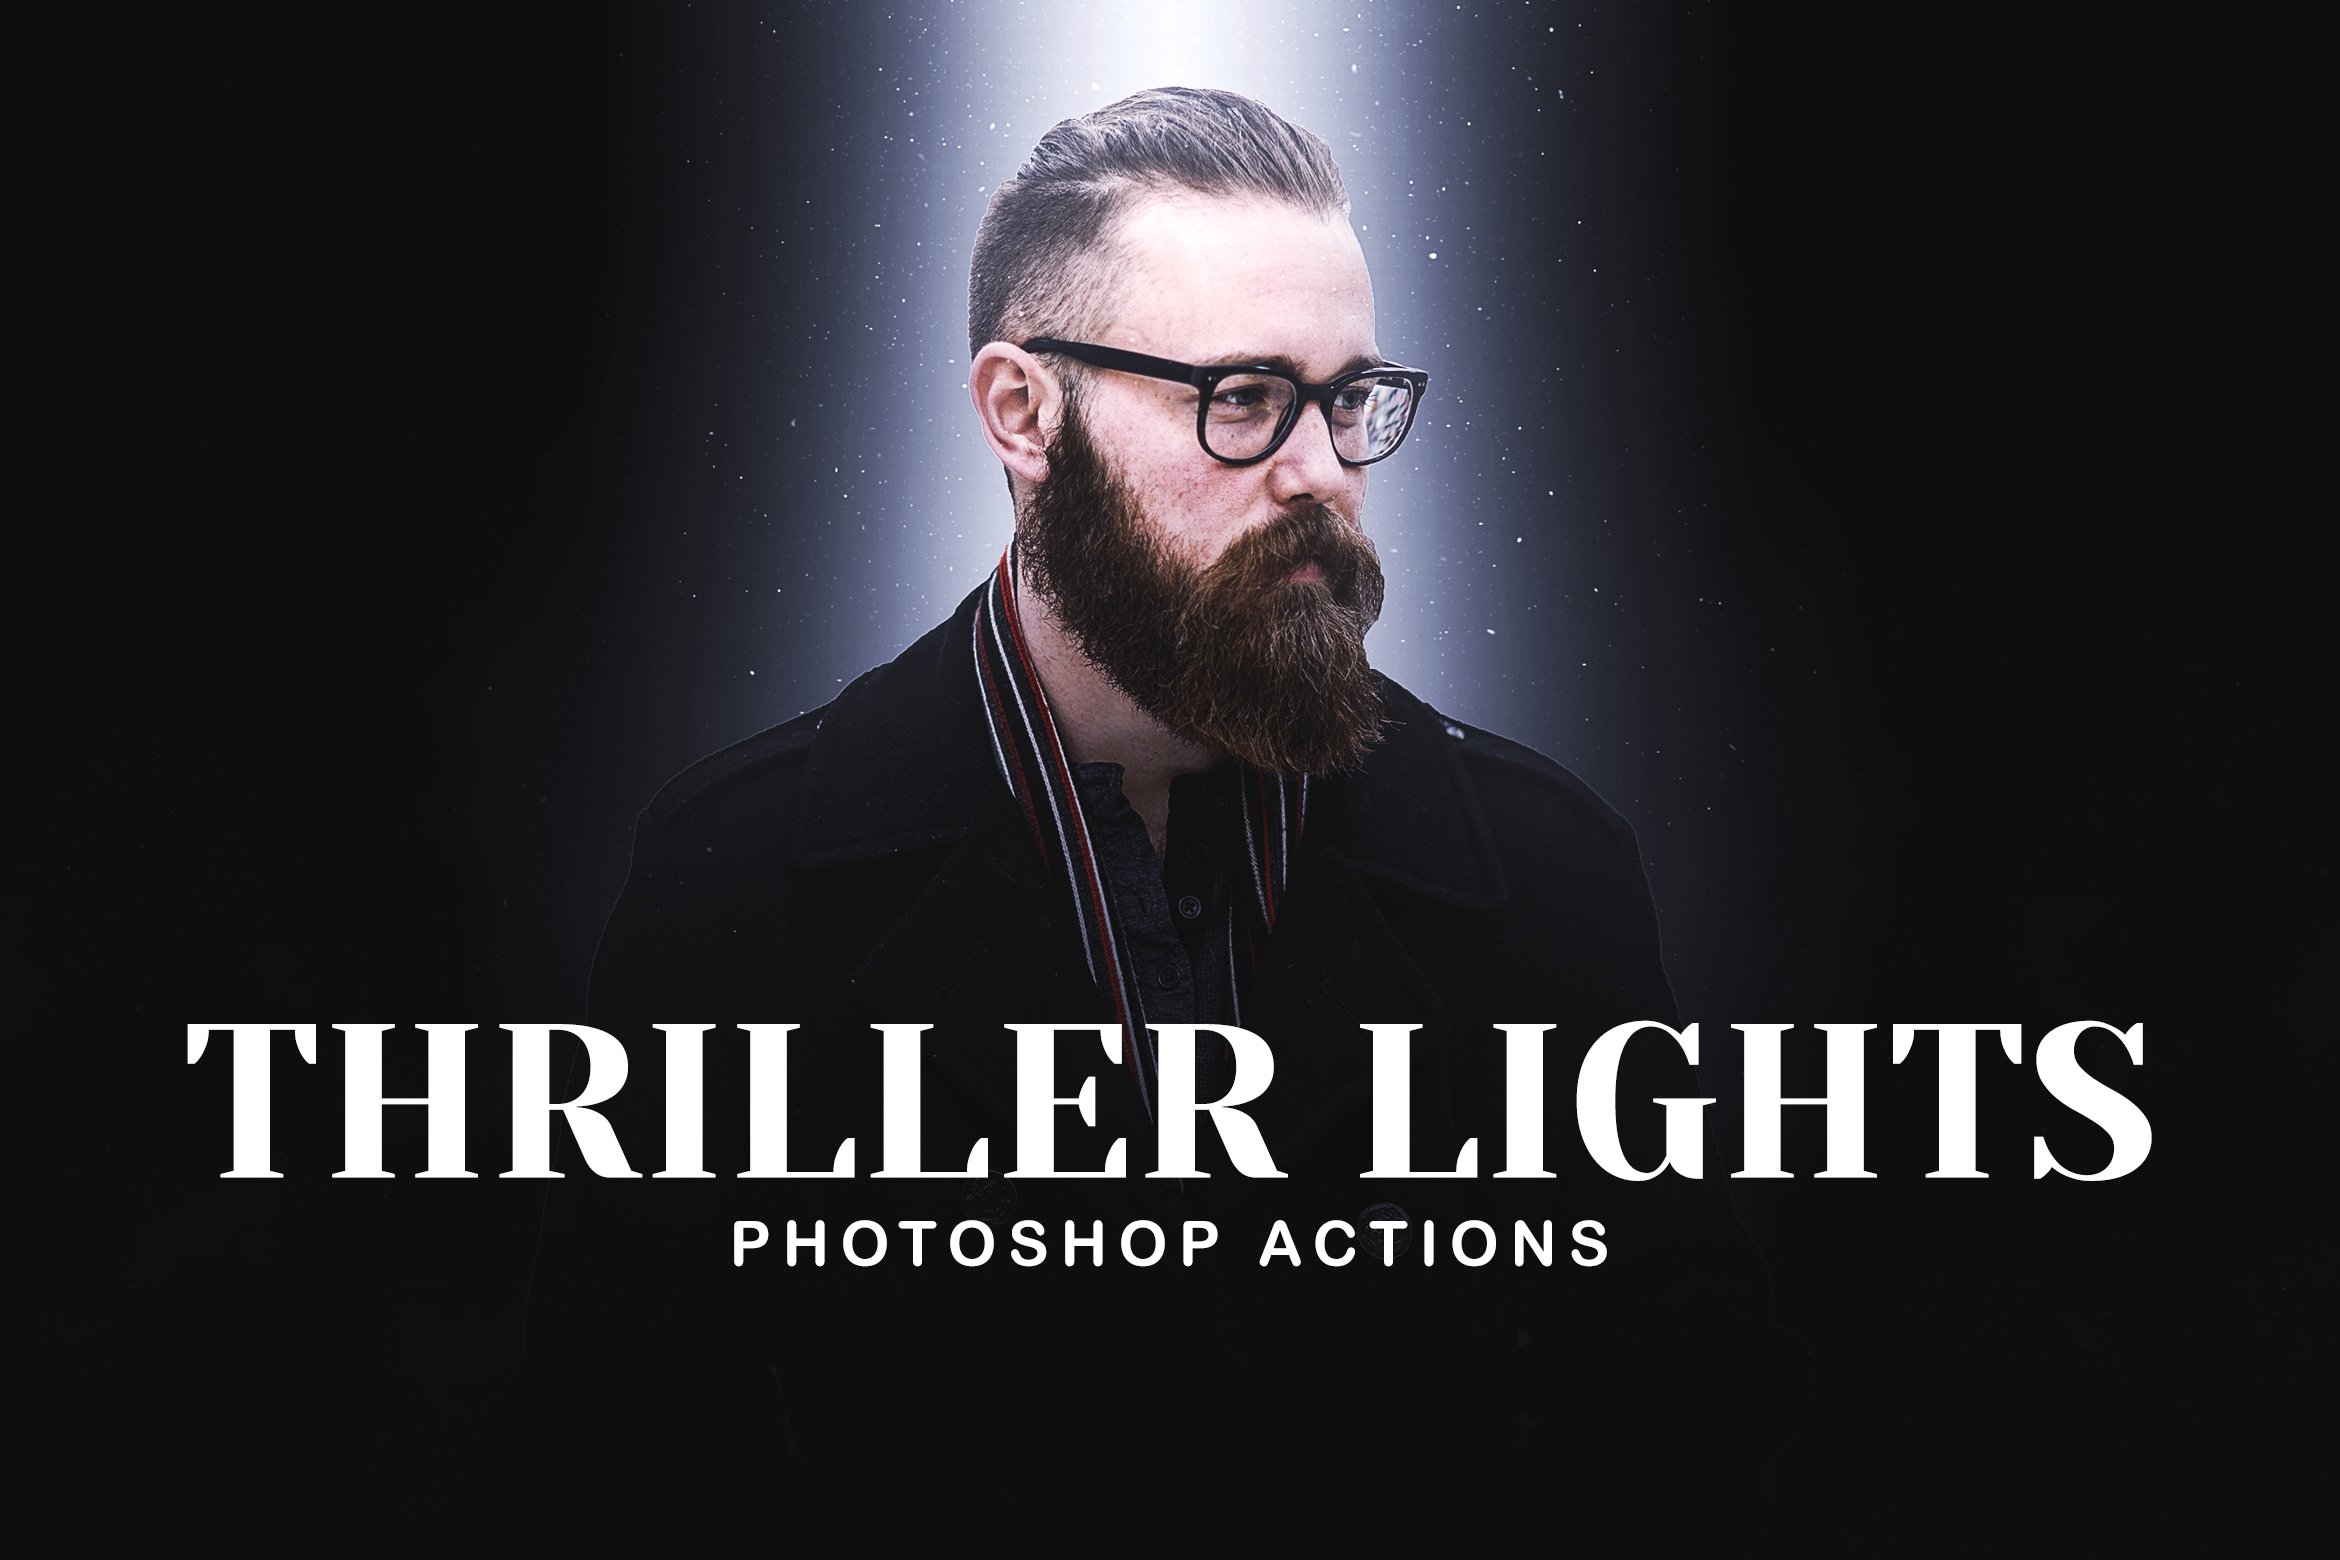 Thriller Lights Photoshop Actionspreview image.